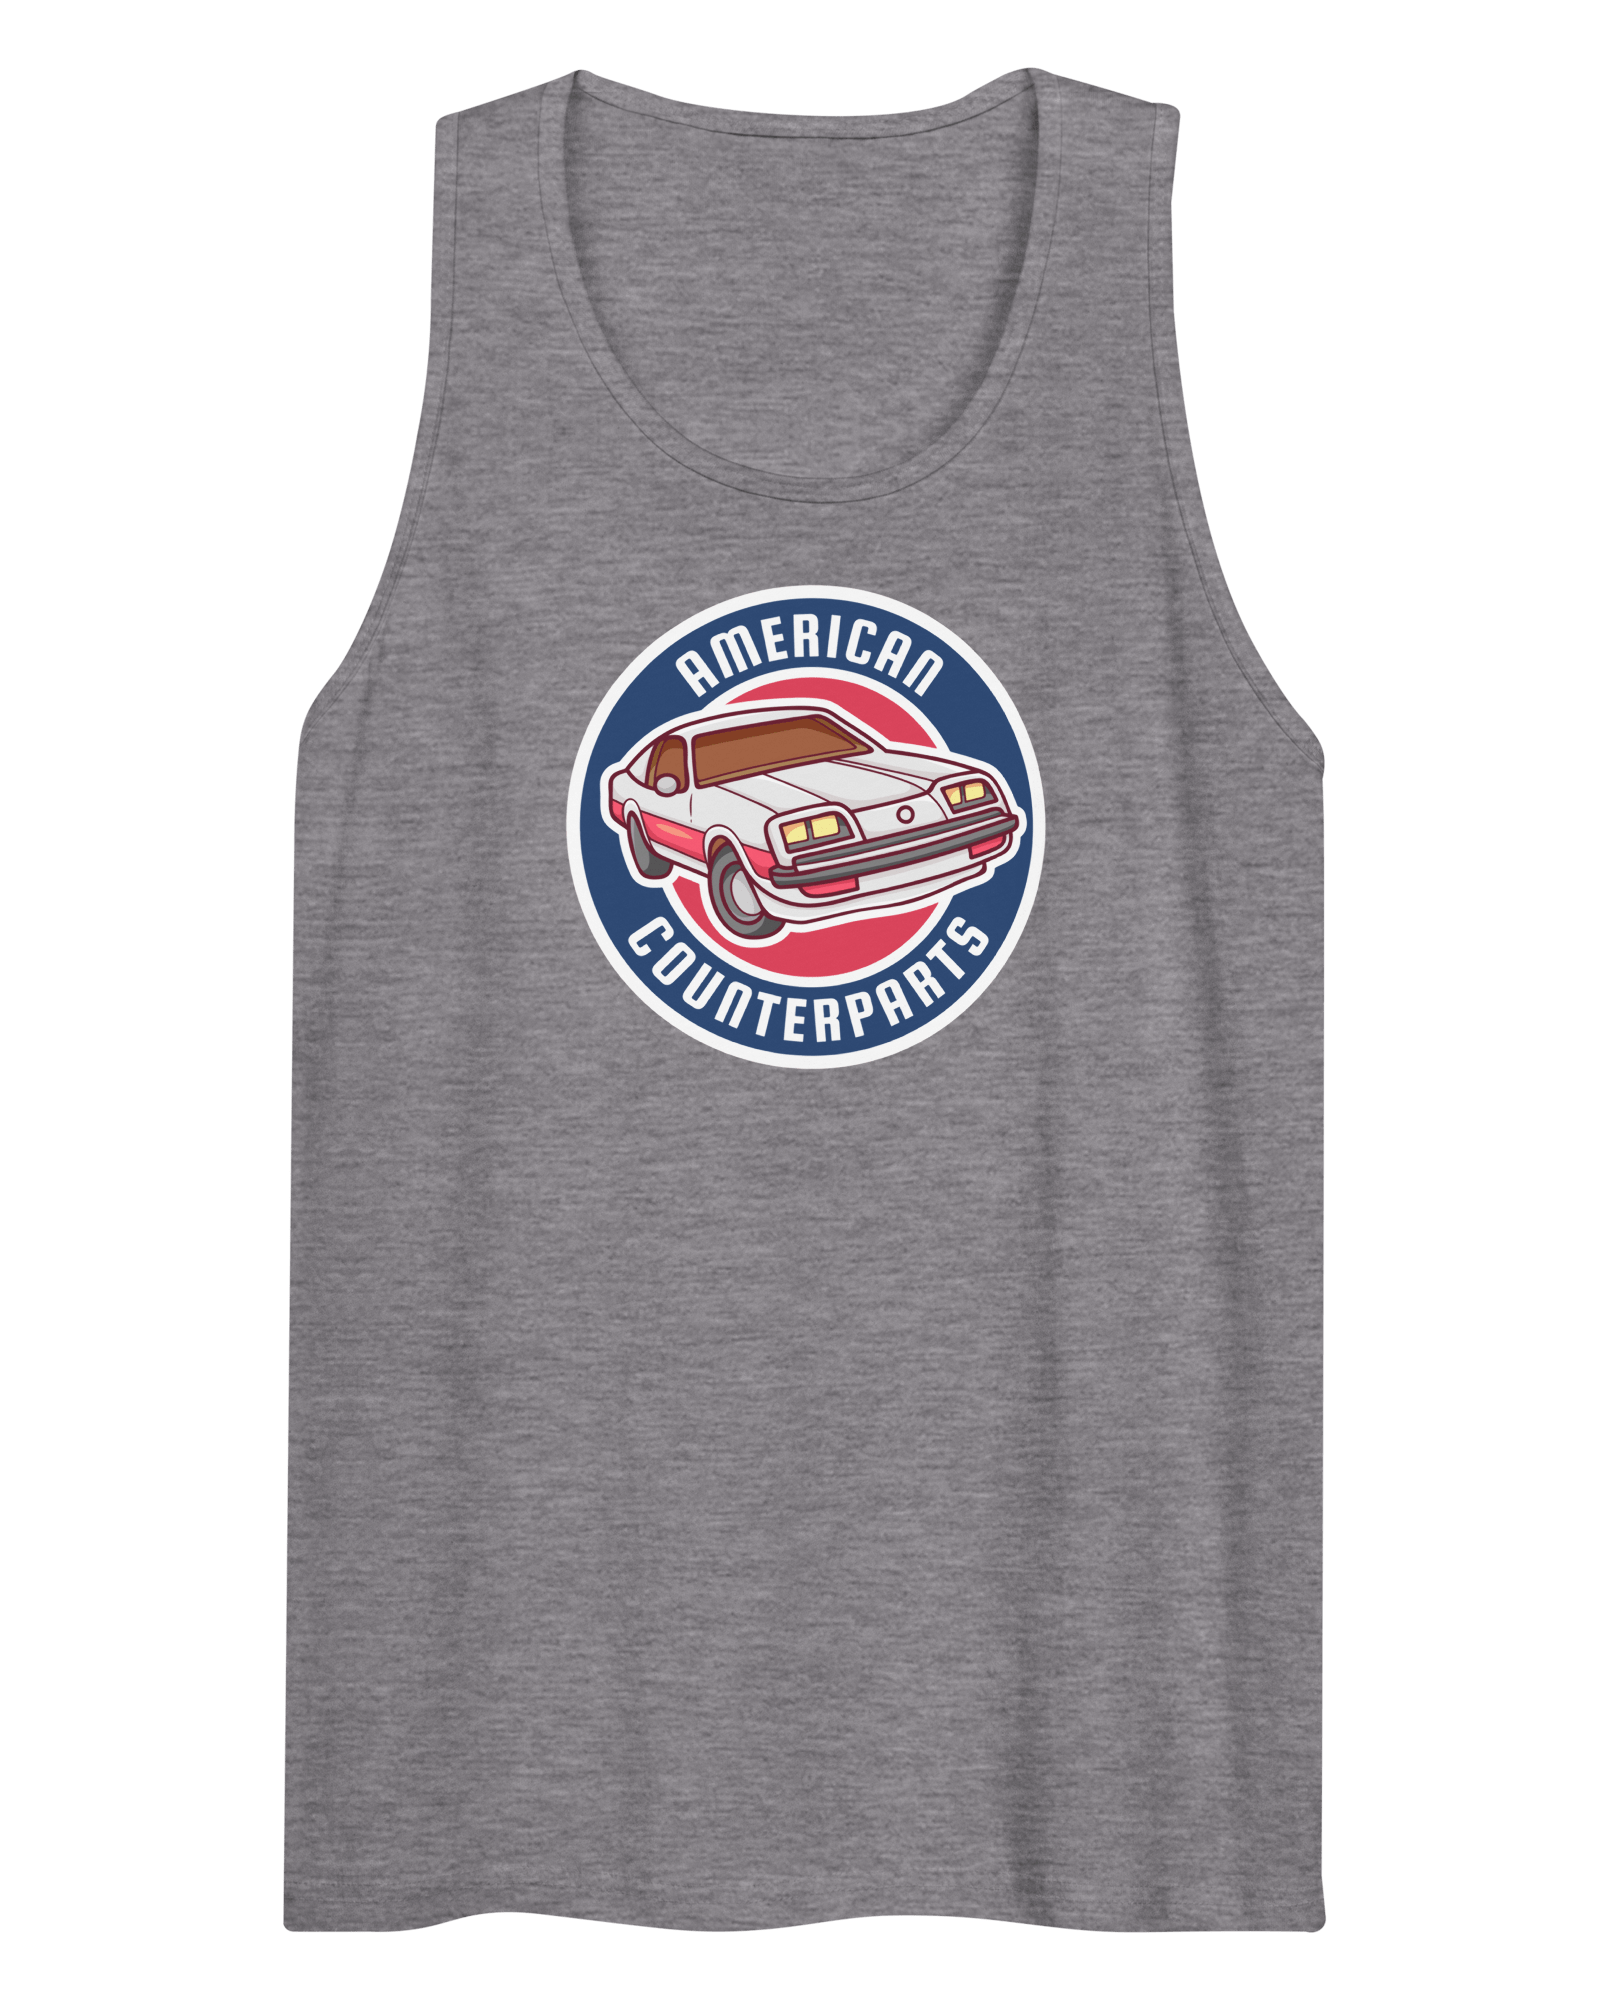 American Counterparts | Men’s Vest | Tank Top Athletic Heather / S Shirts & Tops Jolly & Goode